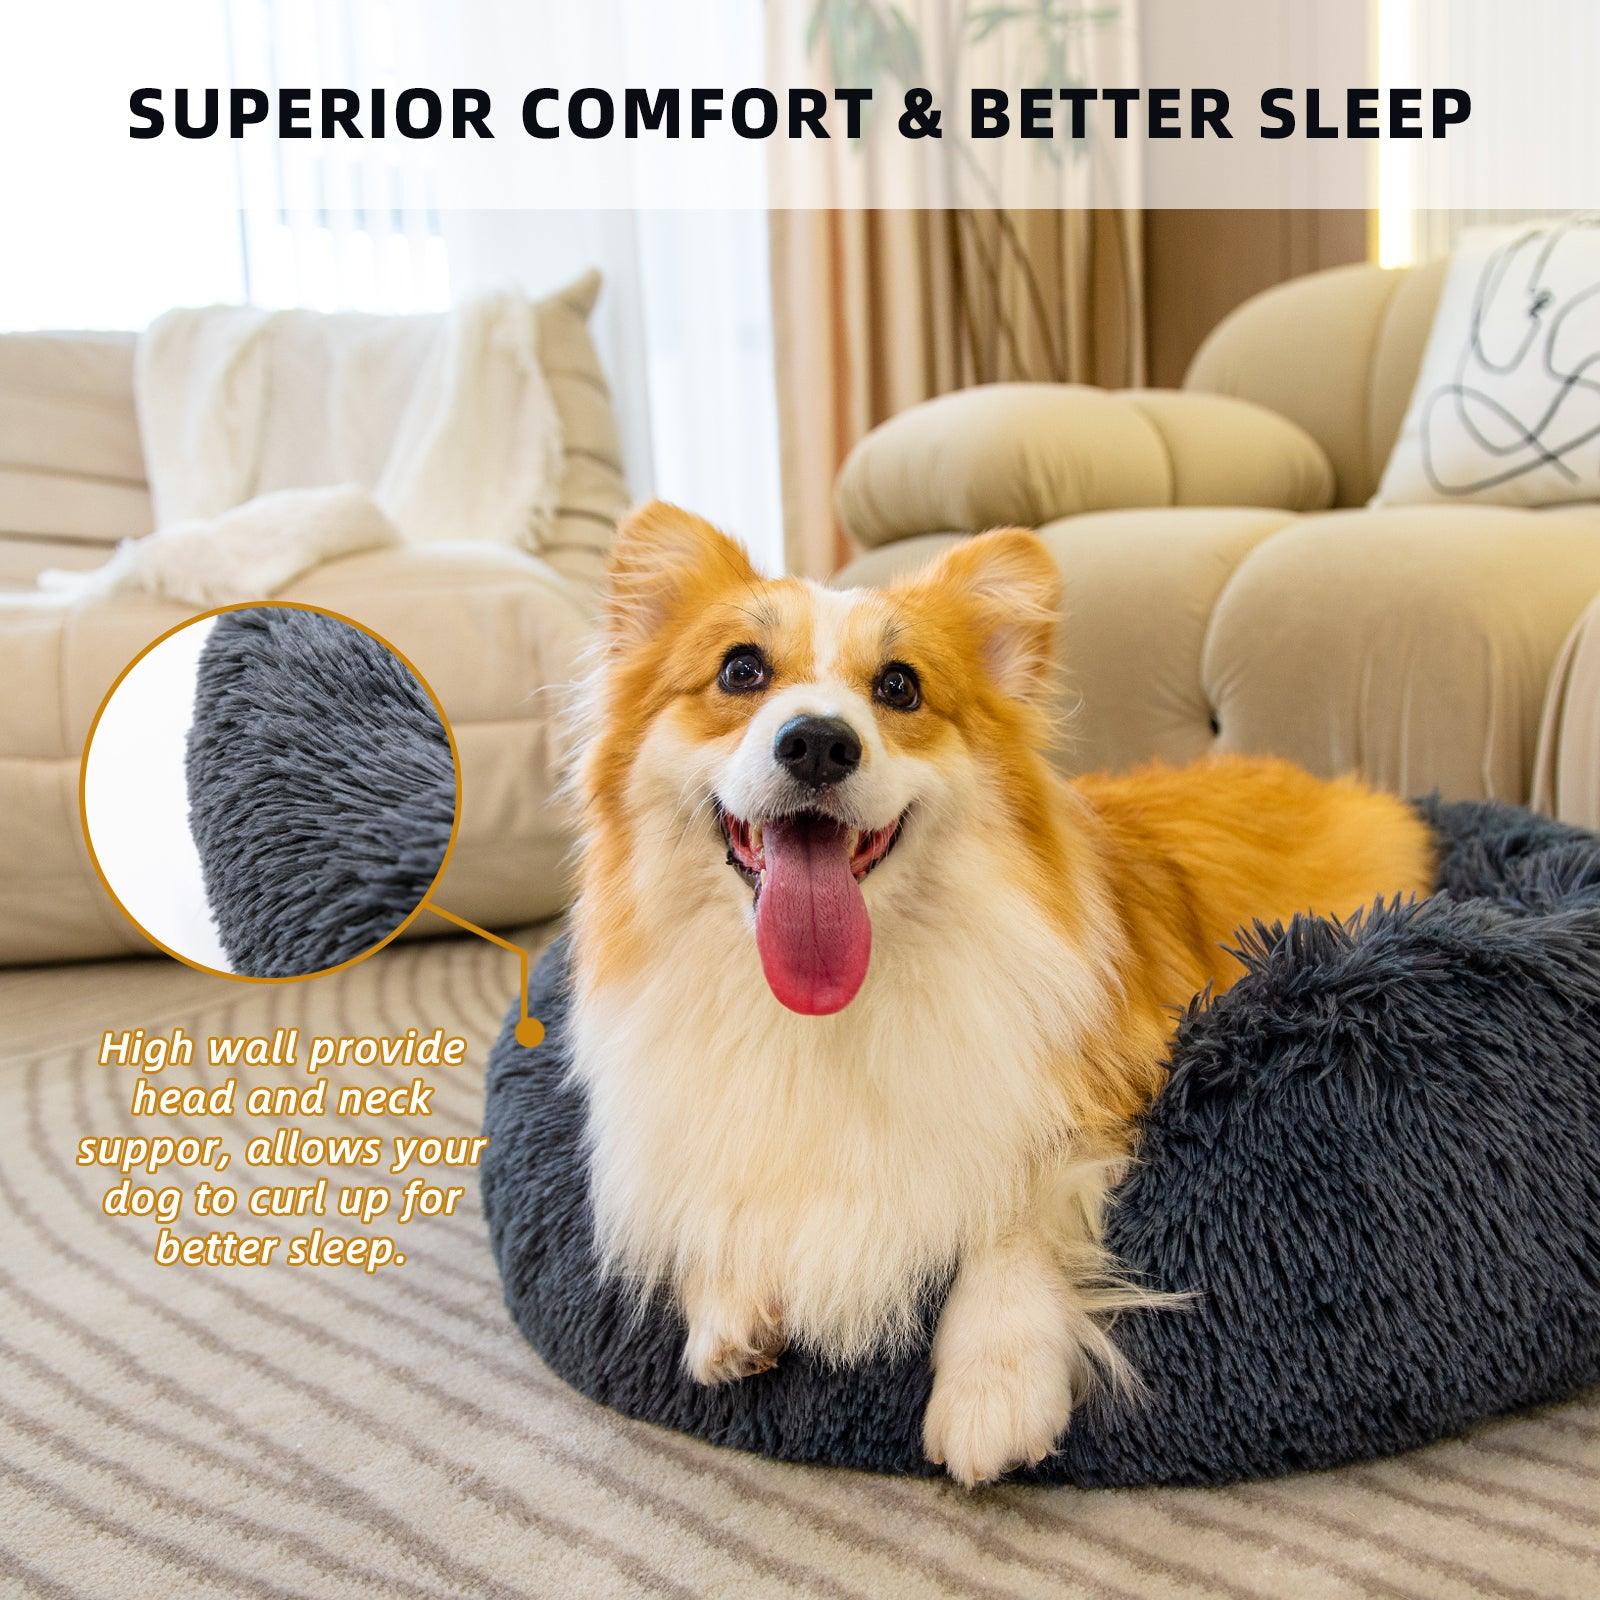 Anxiety Dog Bed | Donut Dog Bed For Dogs & Cats | Orthopaedic Pet Bed Small Medium Pets - Petzenya